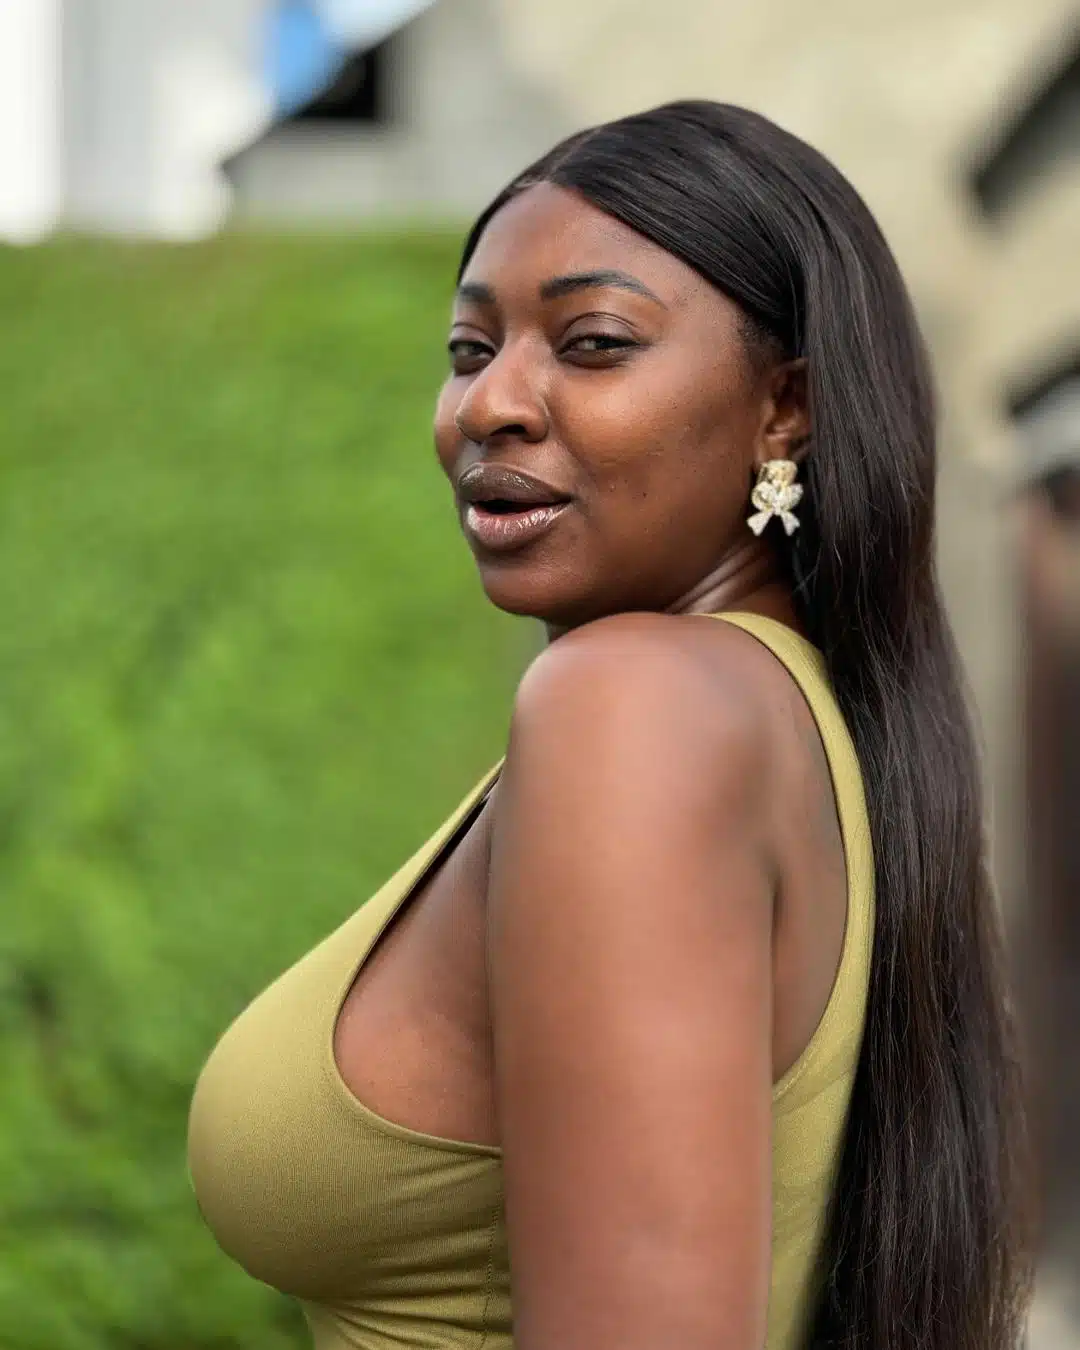 Yvonne Jegede opens up about her divorce, reveals she was primary breadwinner